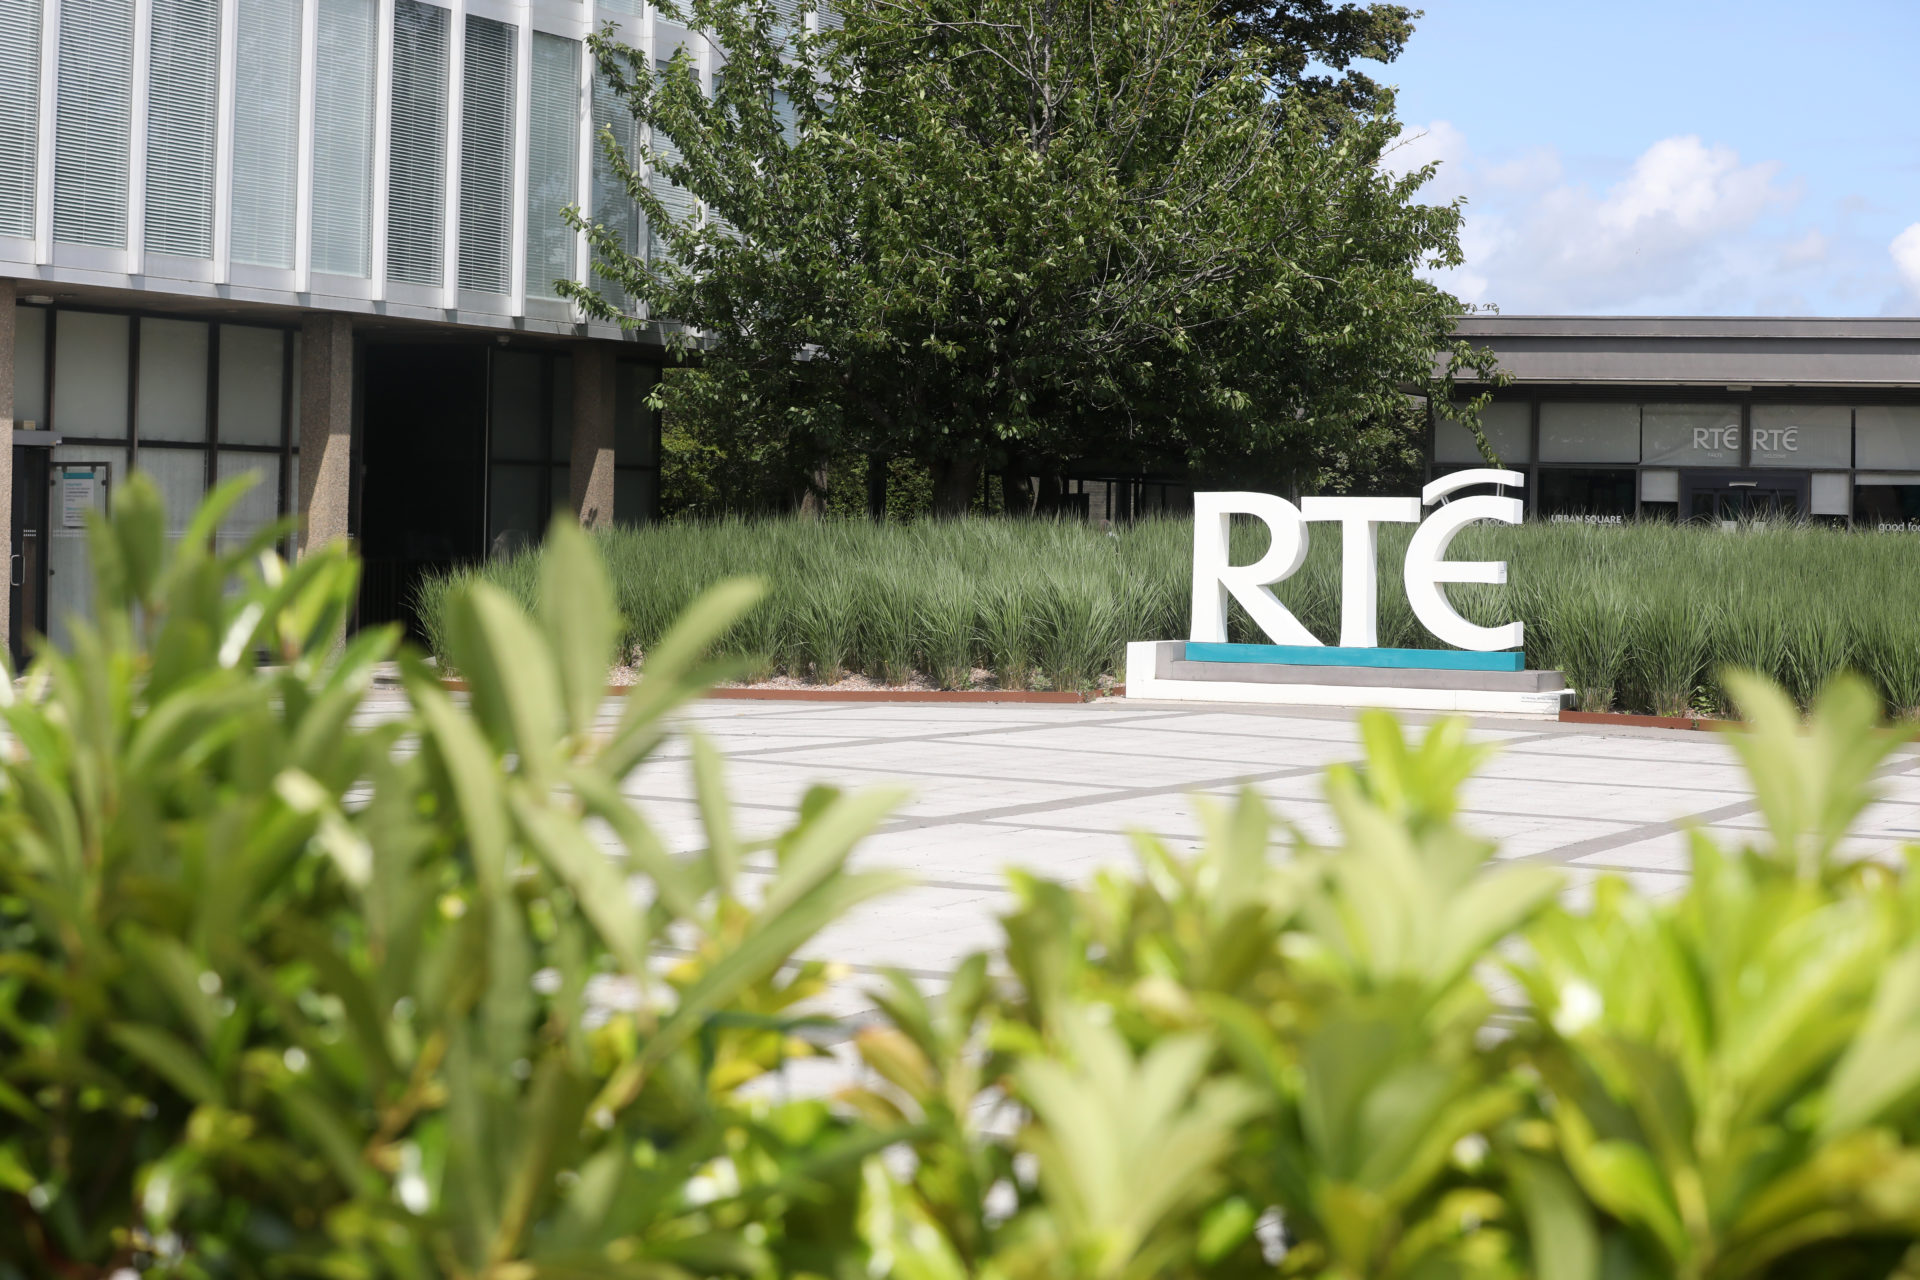 The RTÉ logo at the station in Donnybrook, Dublin 4